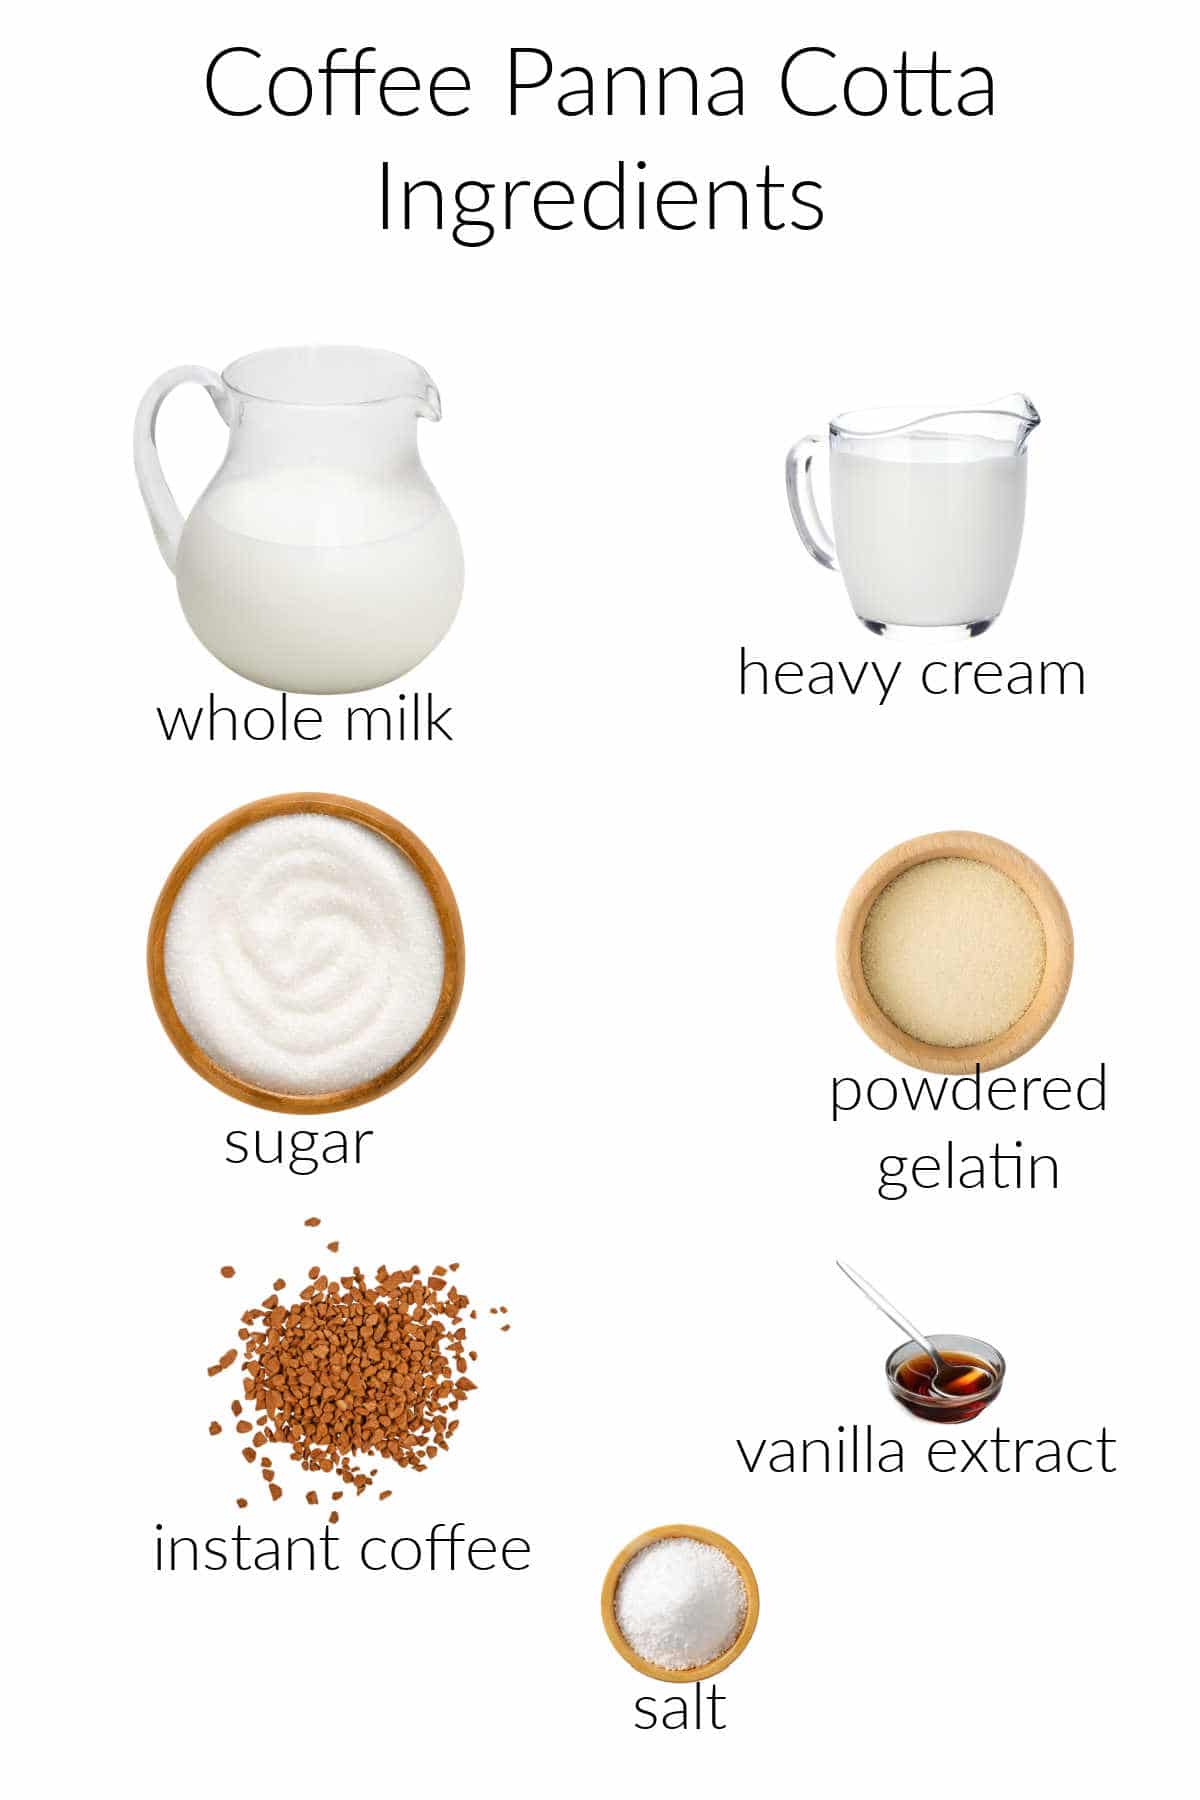 A collage of ingredients for making coffee panna cotta: Clear pitcher of whole milk, clear pitcher of heavy cream, round wooden bowl of white sugar, small round wooden bowl of powdered gelatin, instant coffee granules poured in a pile, a small clear bowl of vanilla extract with a metal spoon, a small wooden bowl with salt granules.